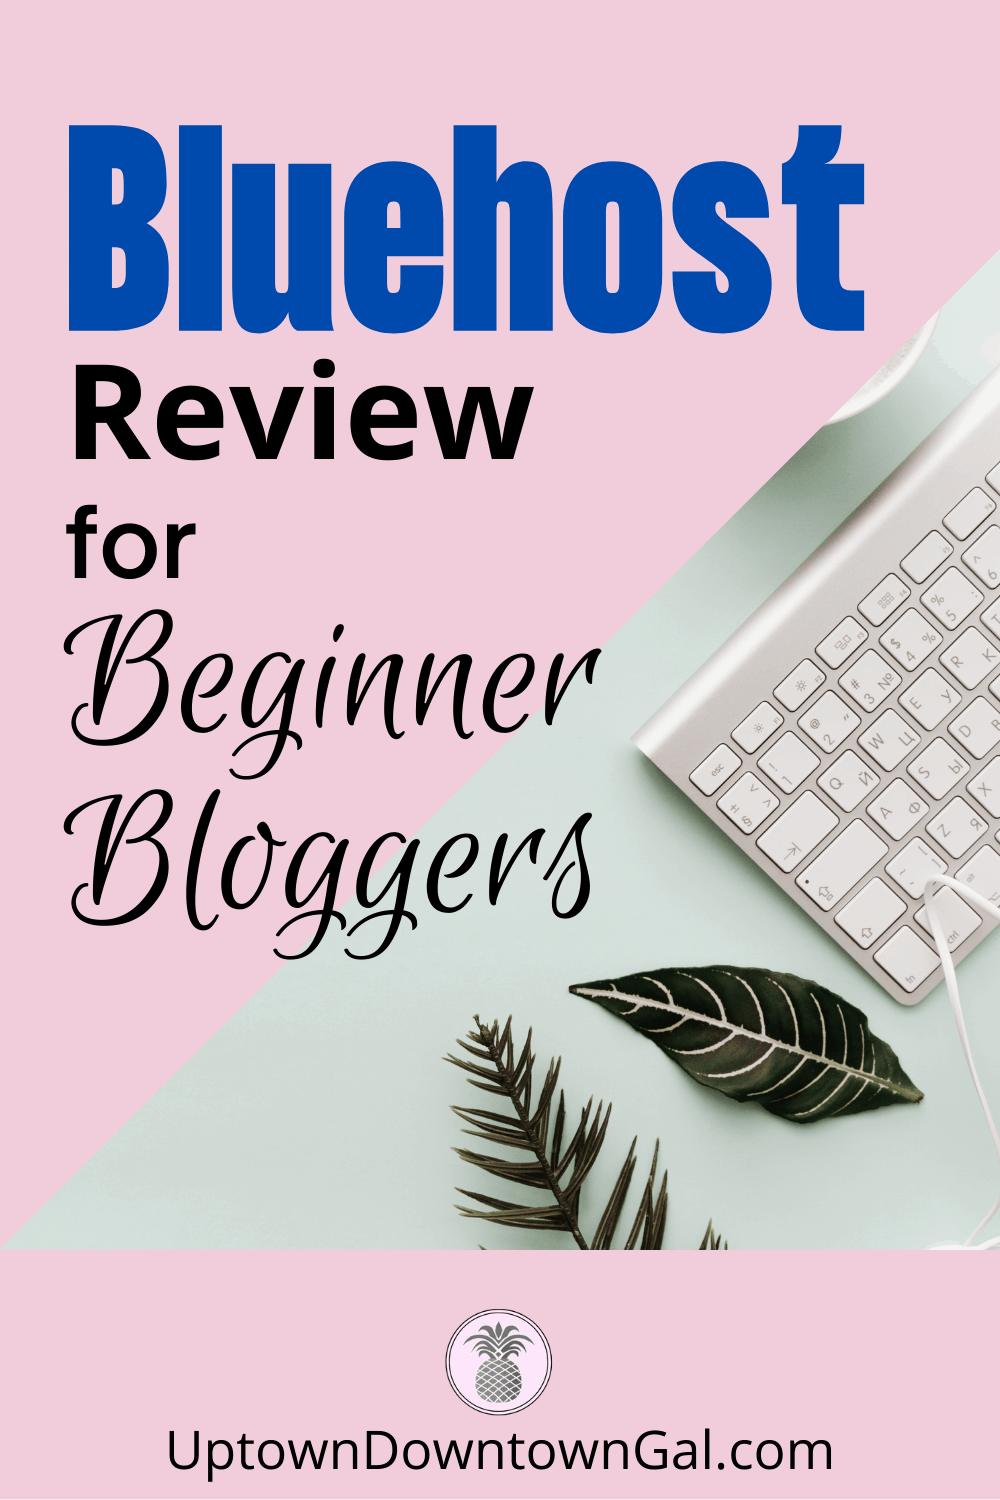 Bluehost Review for Beginner Bloggers